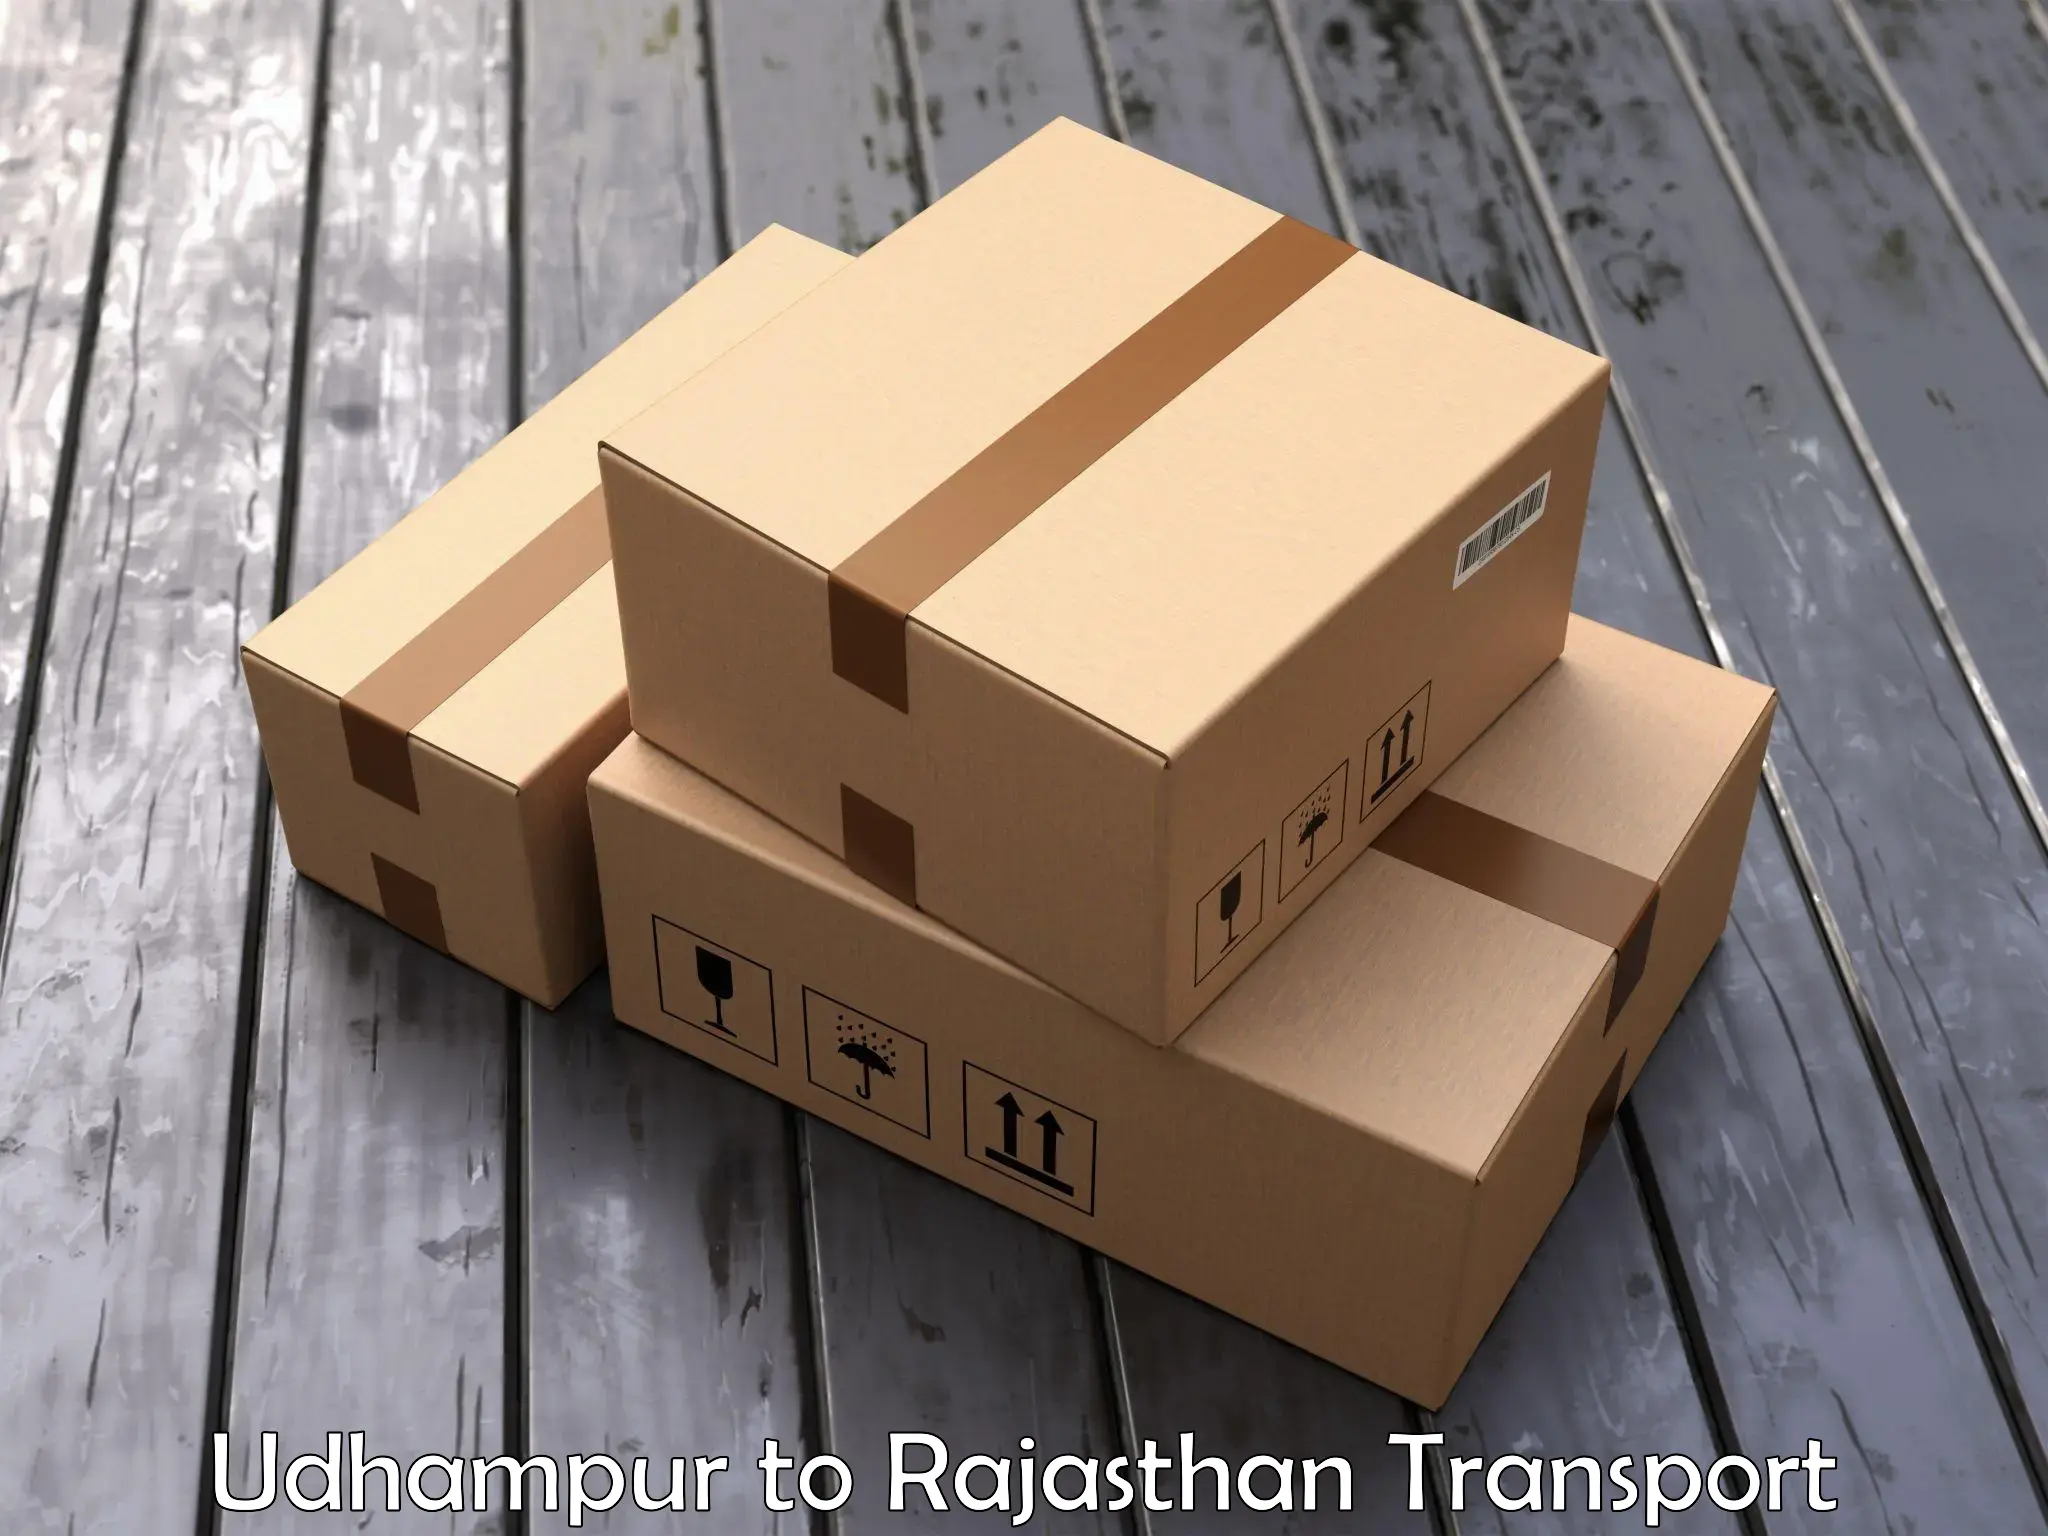 Truck transport companies in India in Udhampur to Dholpur